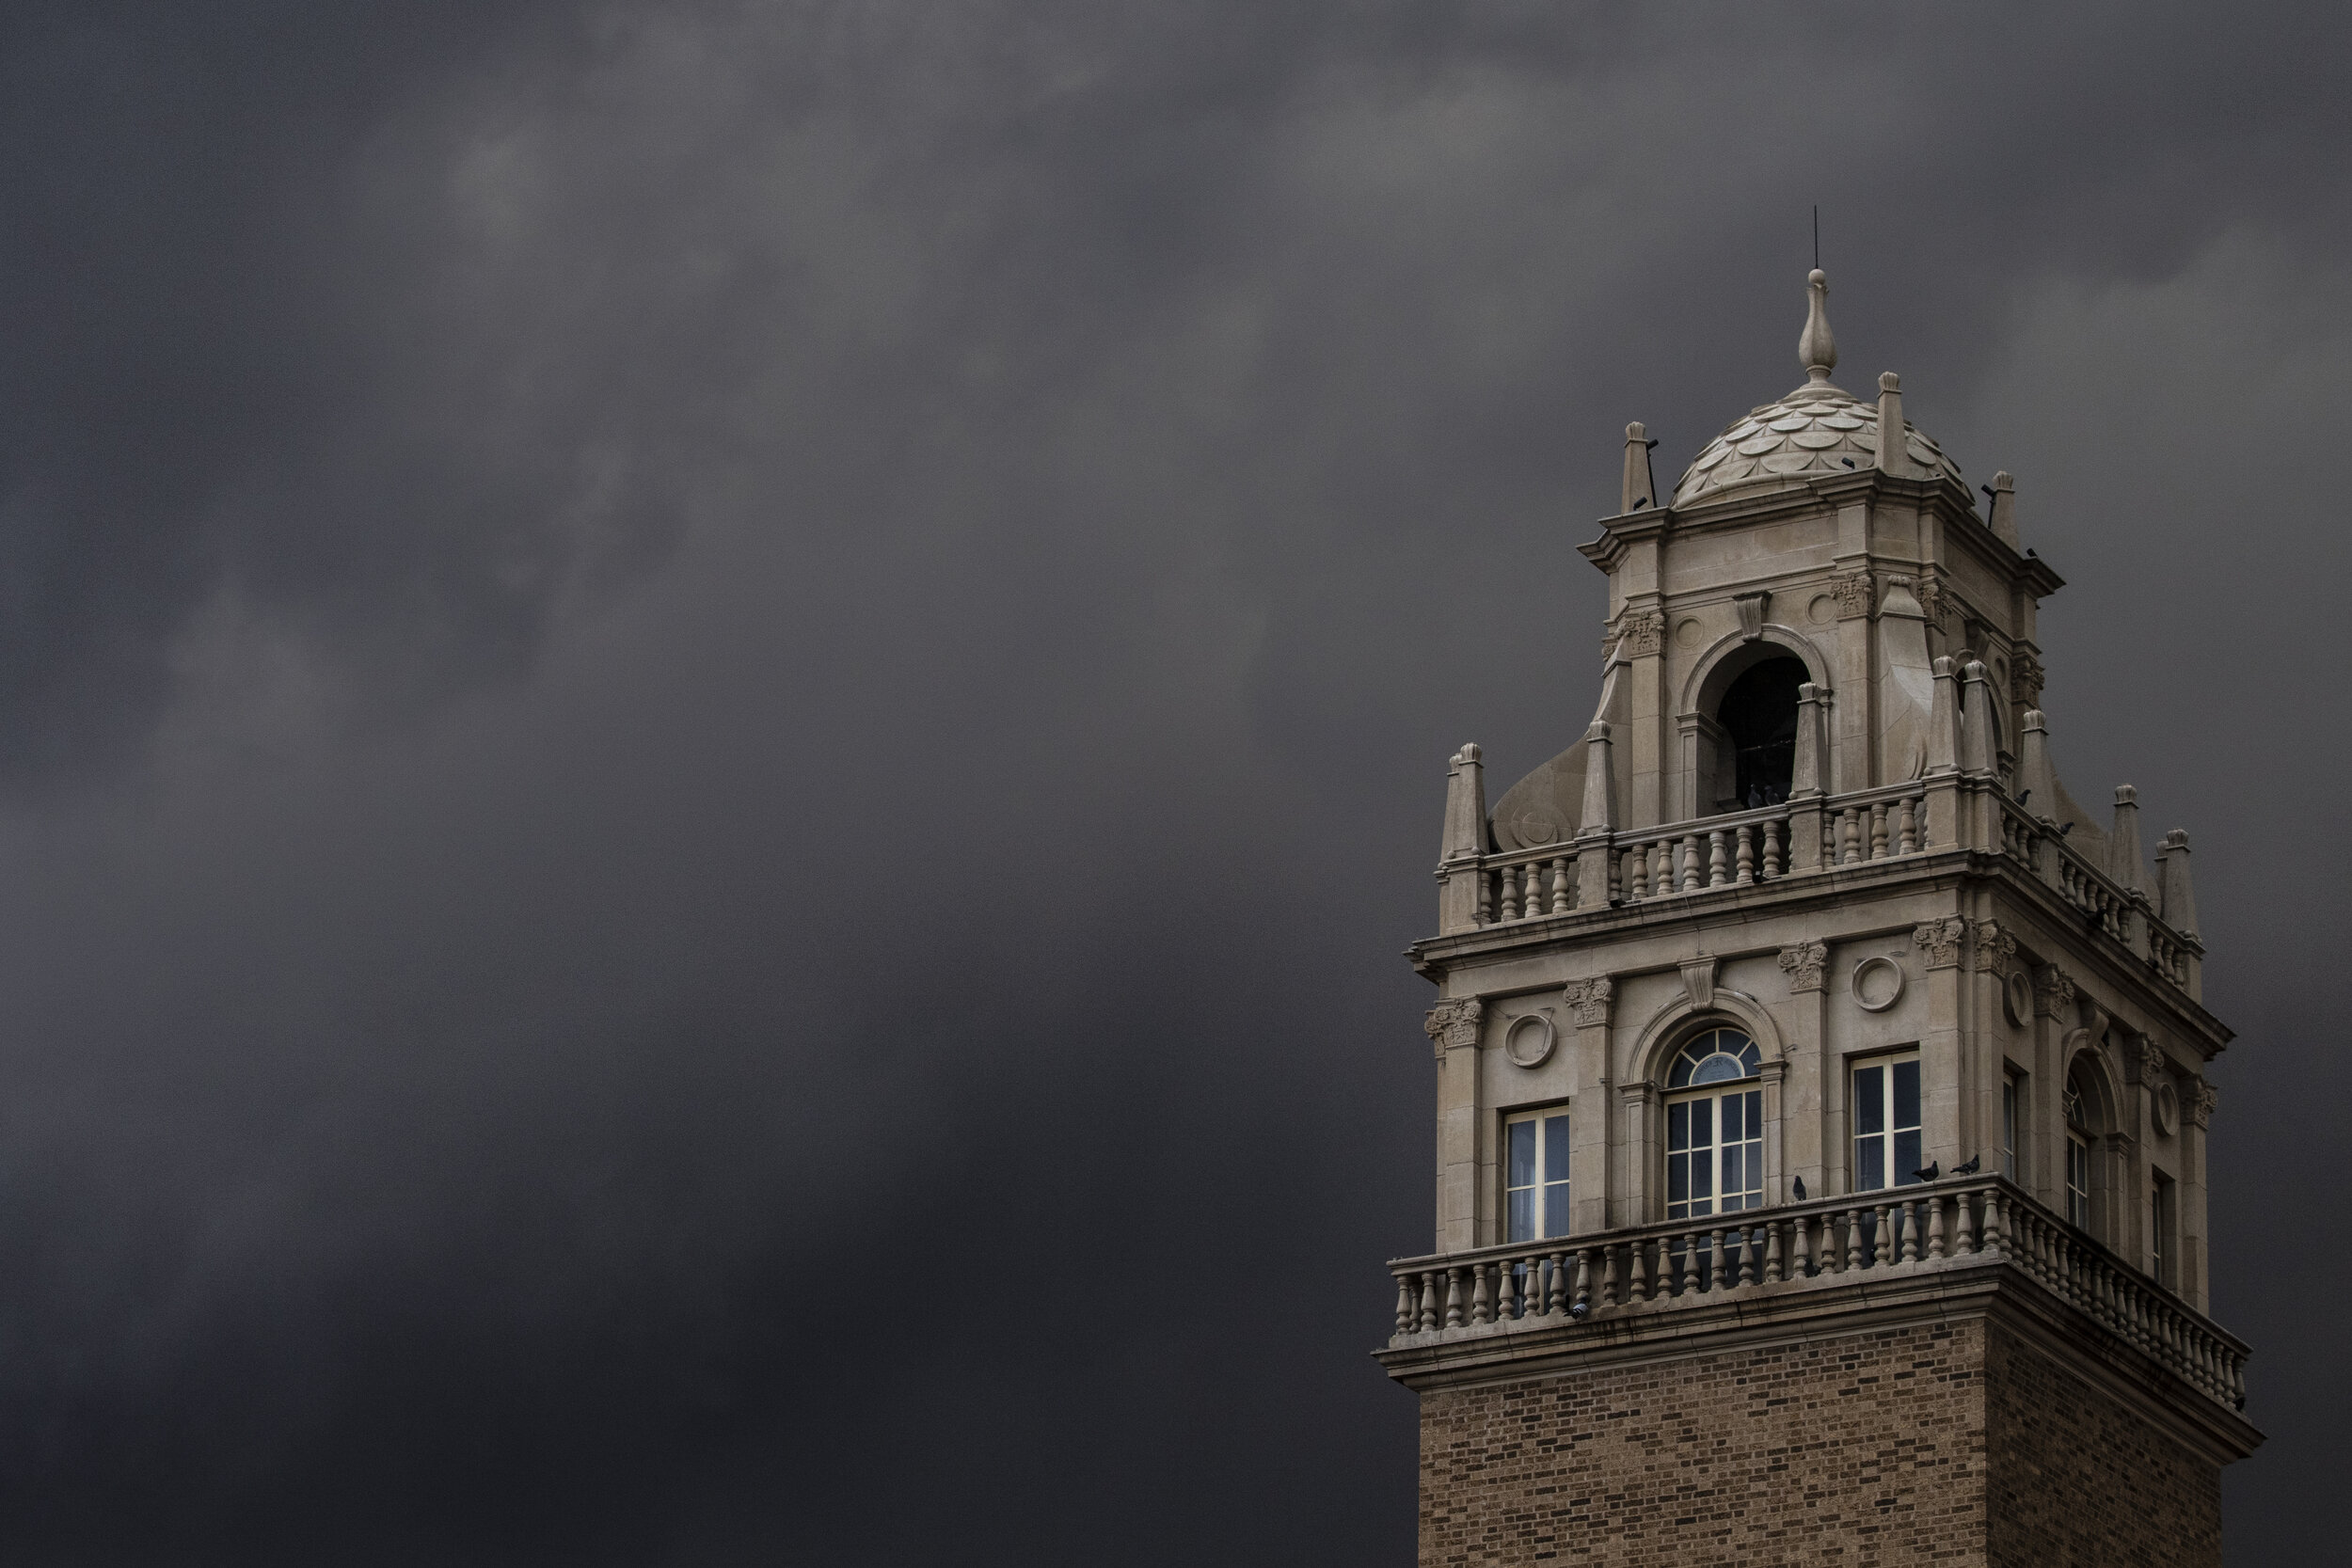  The Texas Tech bell tower becomes engulfed in a spring storm on Monday, March 22, 2021. 